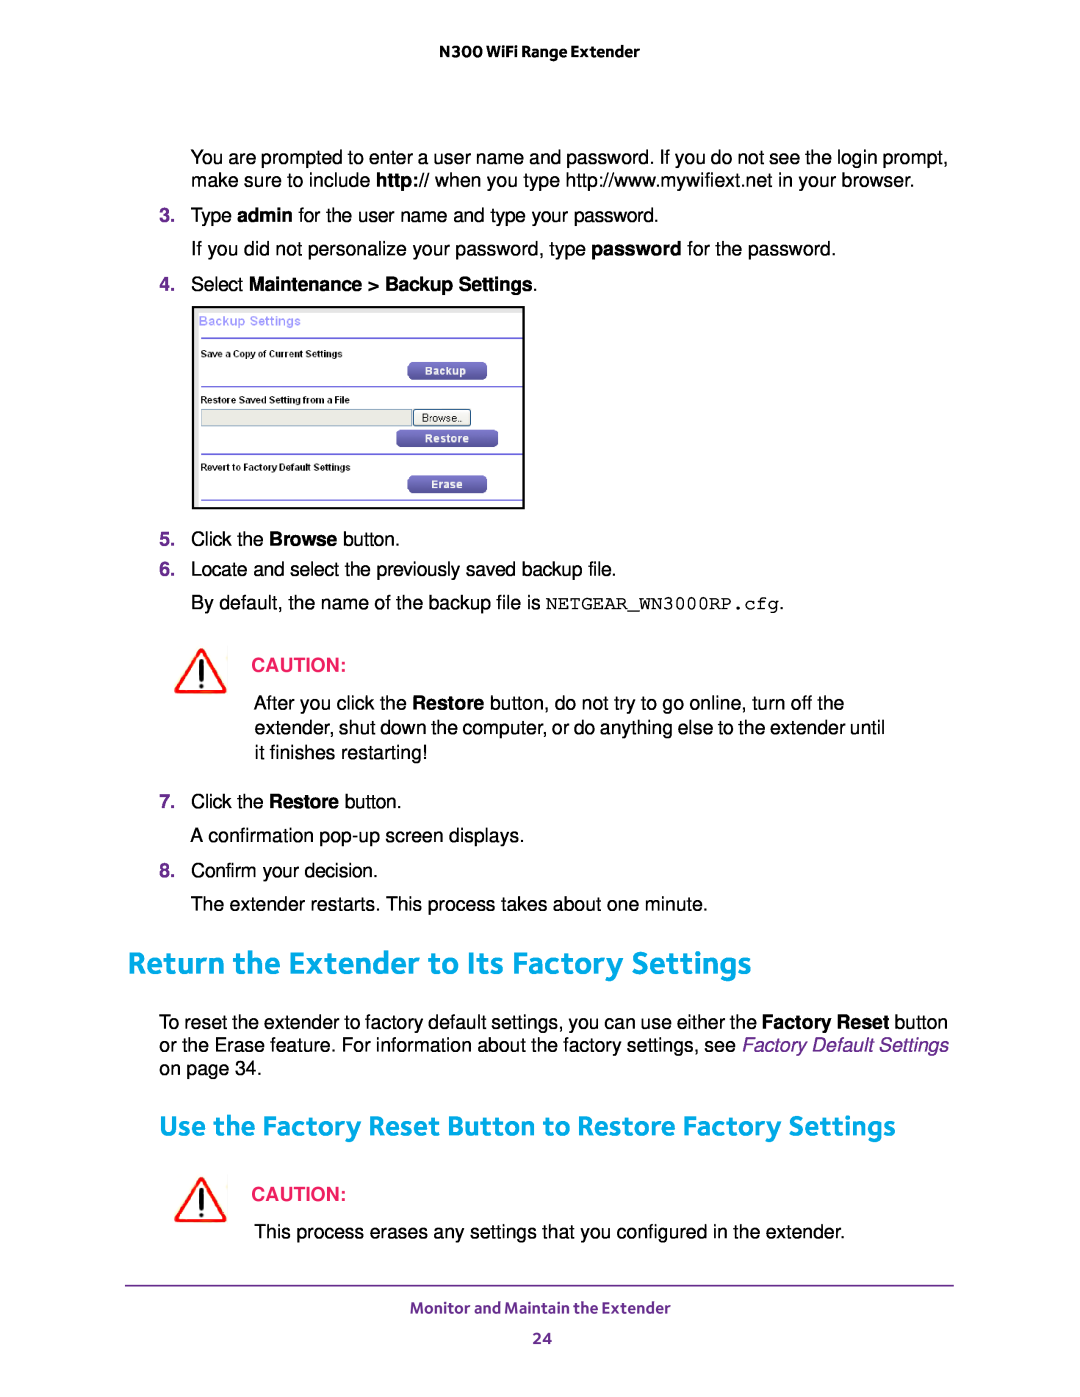 NETGEAR EX2700 Return the Extender to Its Factory Settings, Use the Factory Reset Button to Restore Factory Settings 